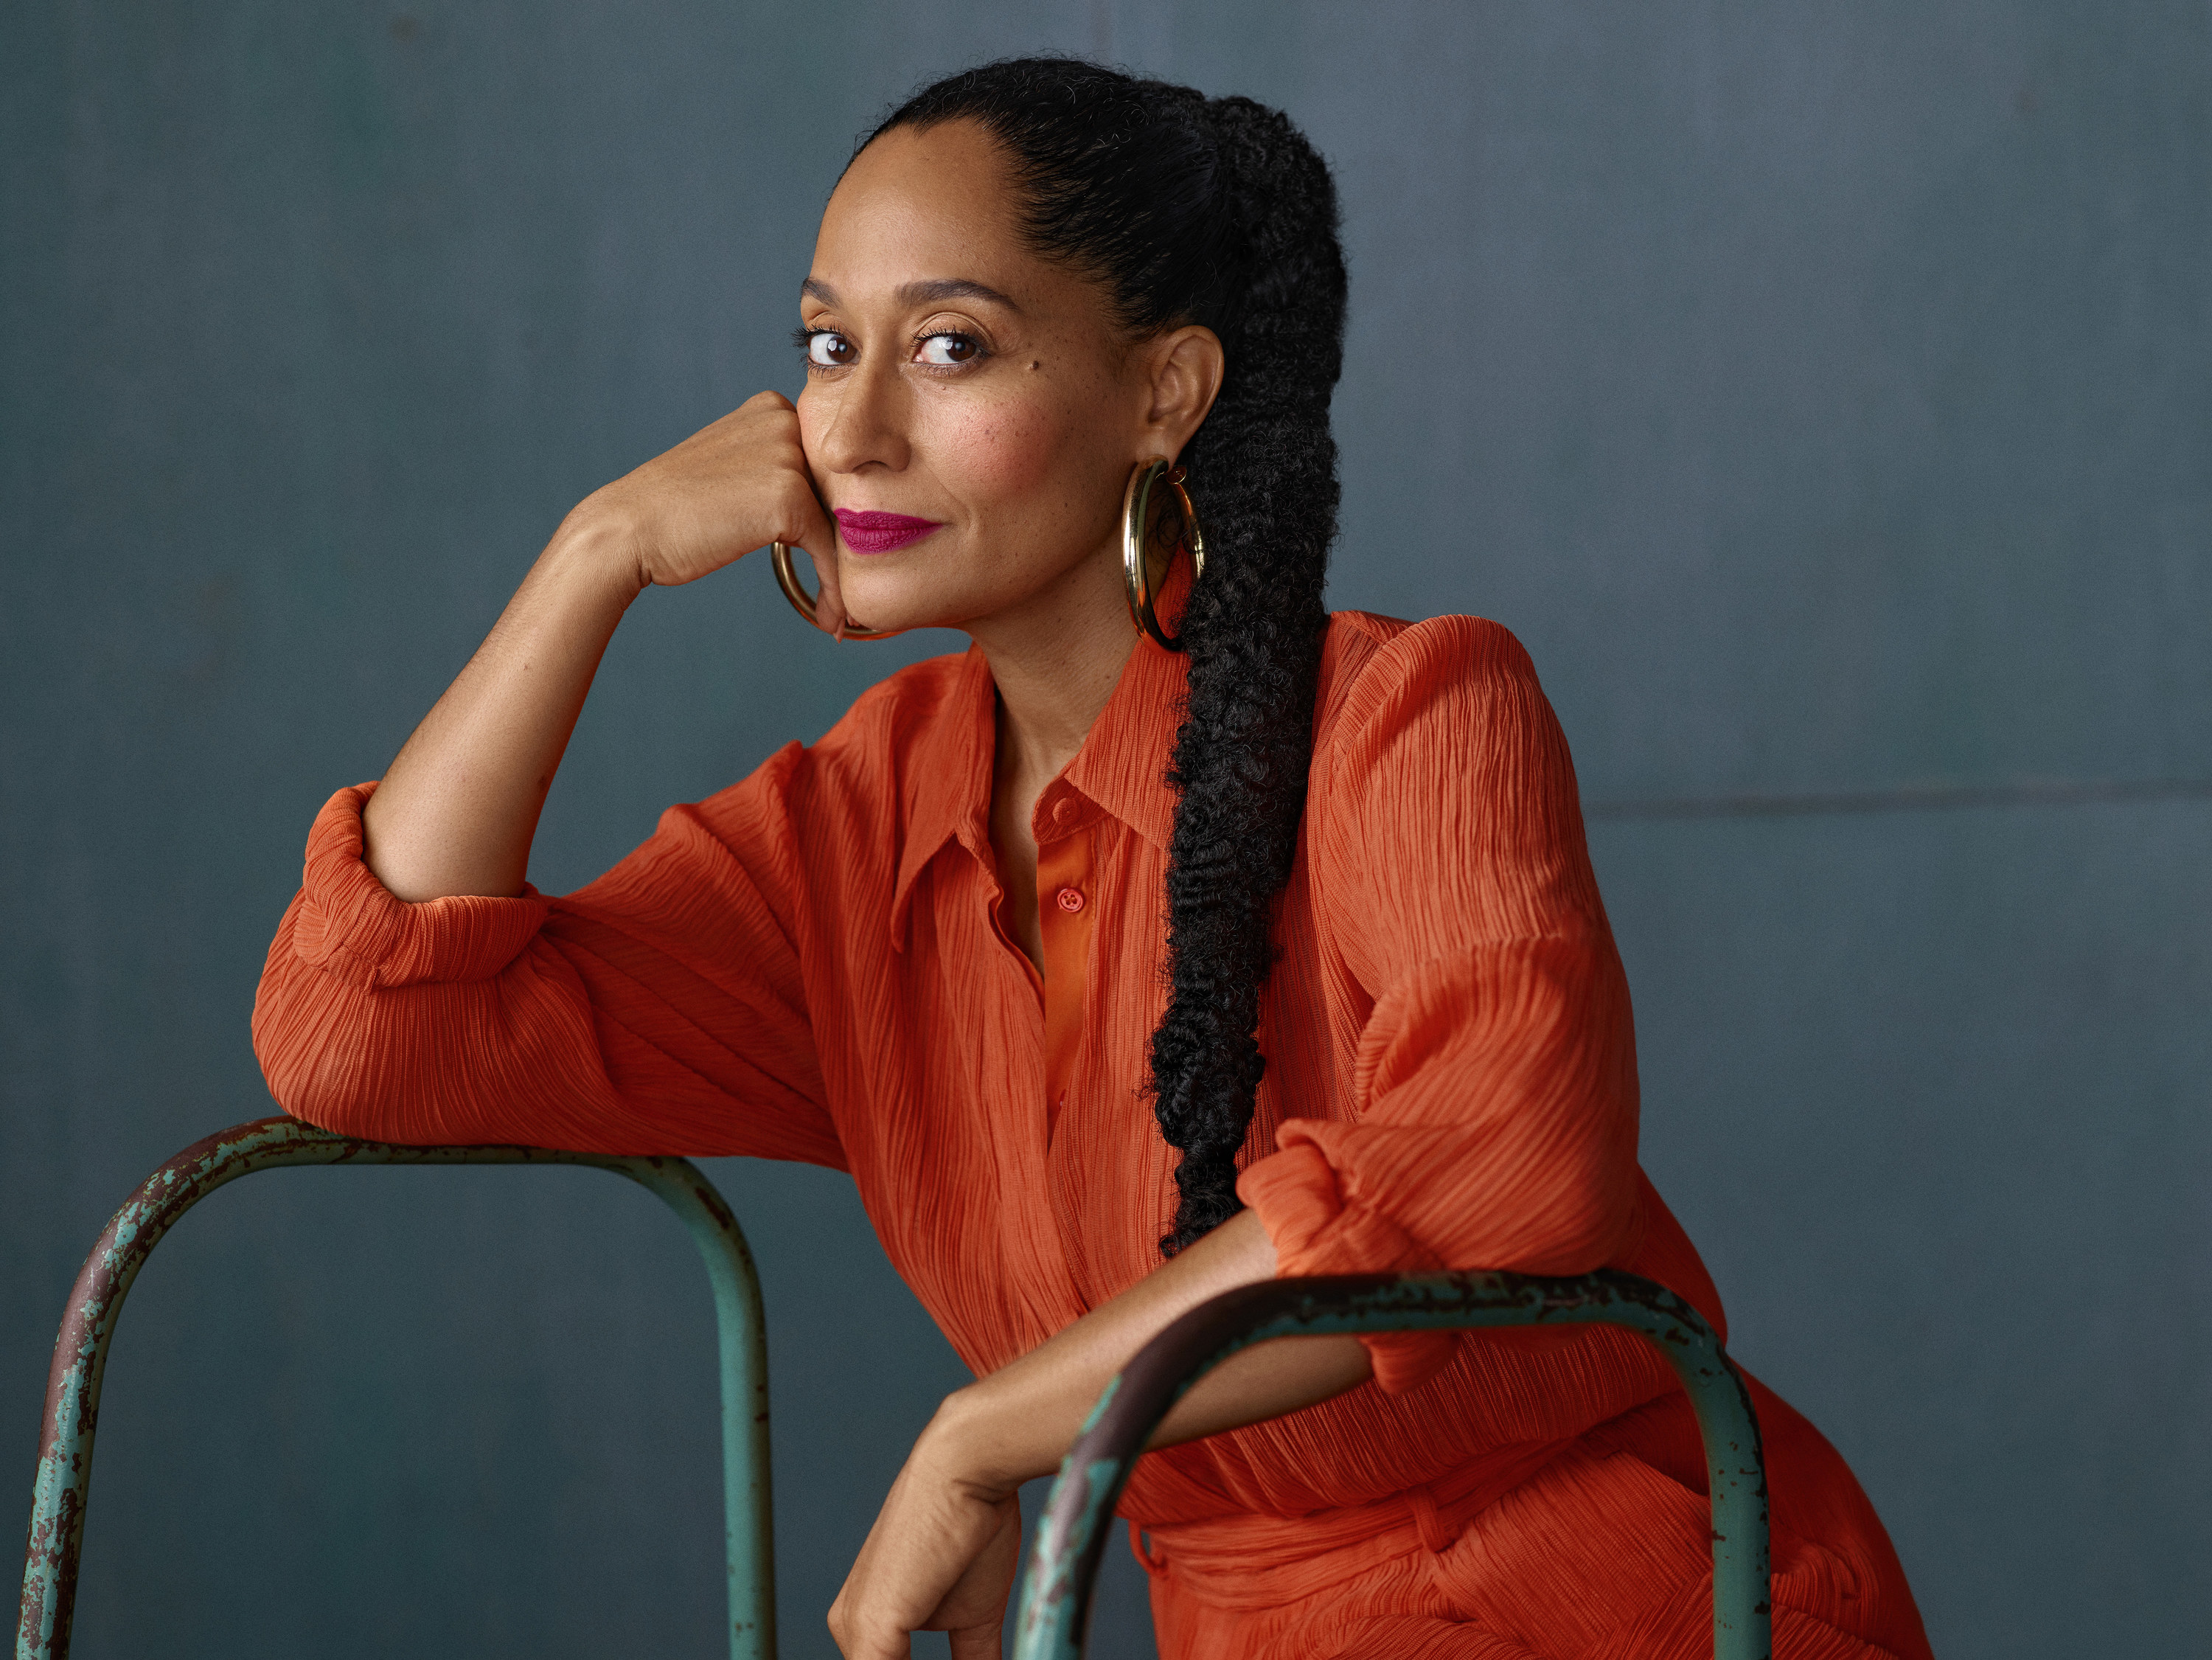 Tracee Ellis Ross posing at a photoshoot